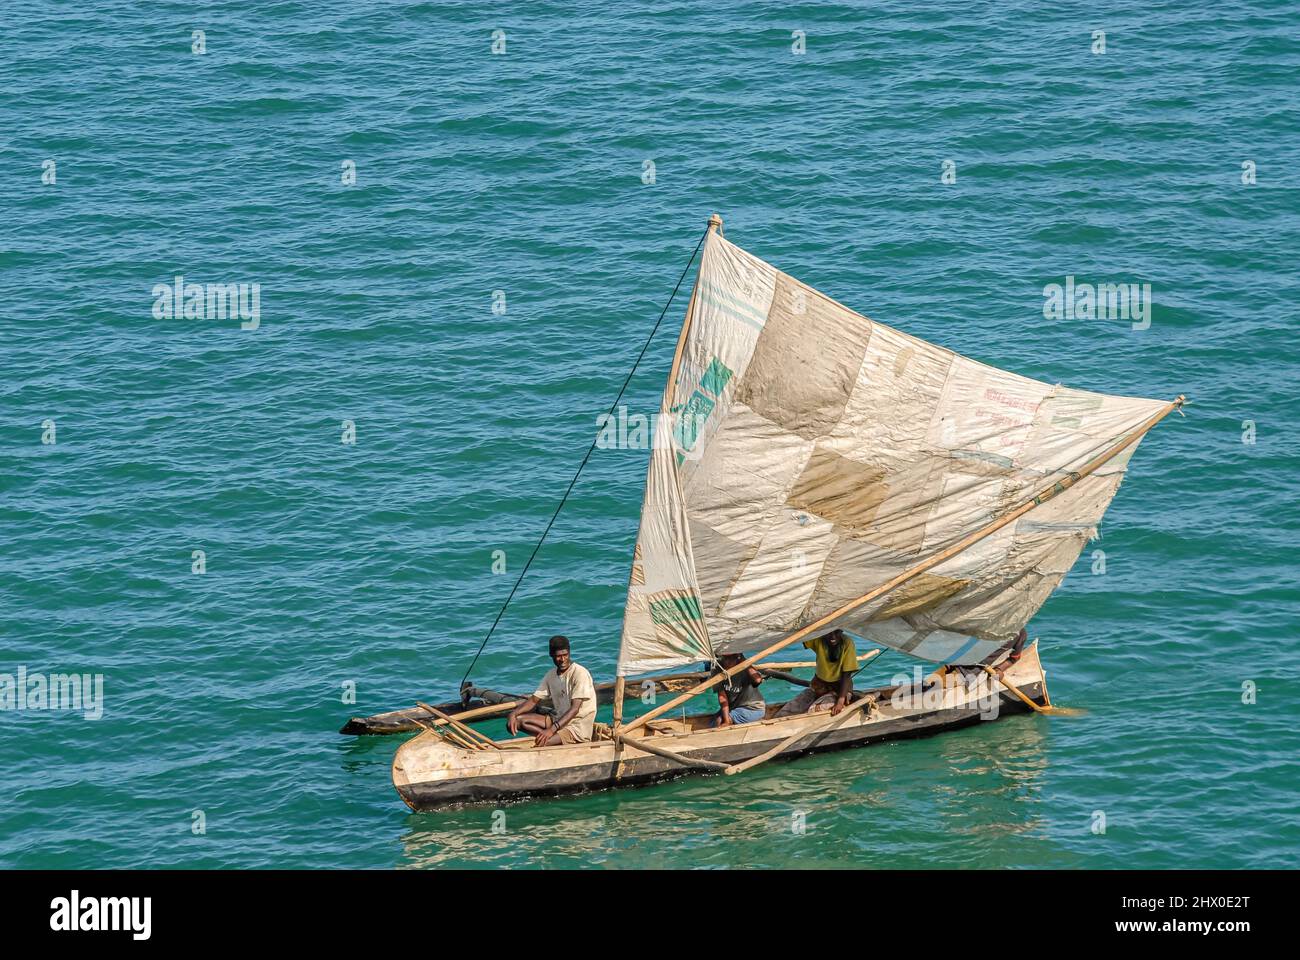 Madagascar fishermen in outrigger sailing boat on the sea, Africa Stock Photo